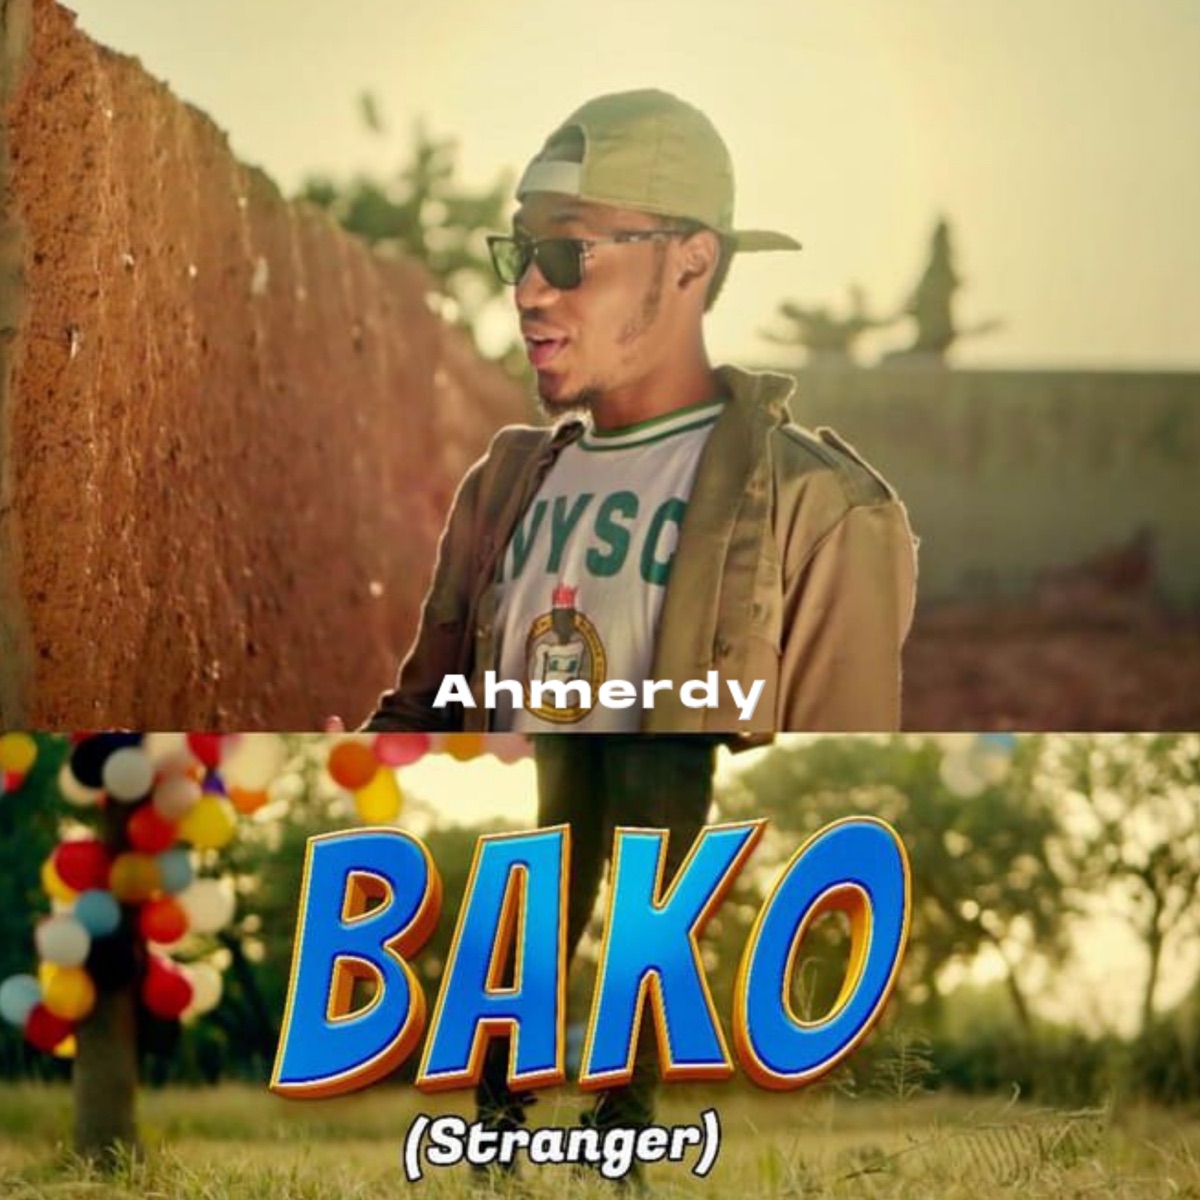 Ahmerdy - Bako (Stranger) » Download & Stream » Yours Truly